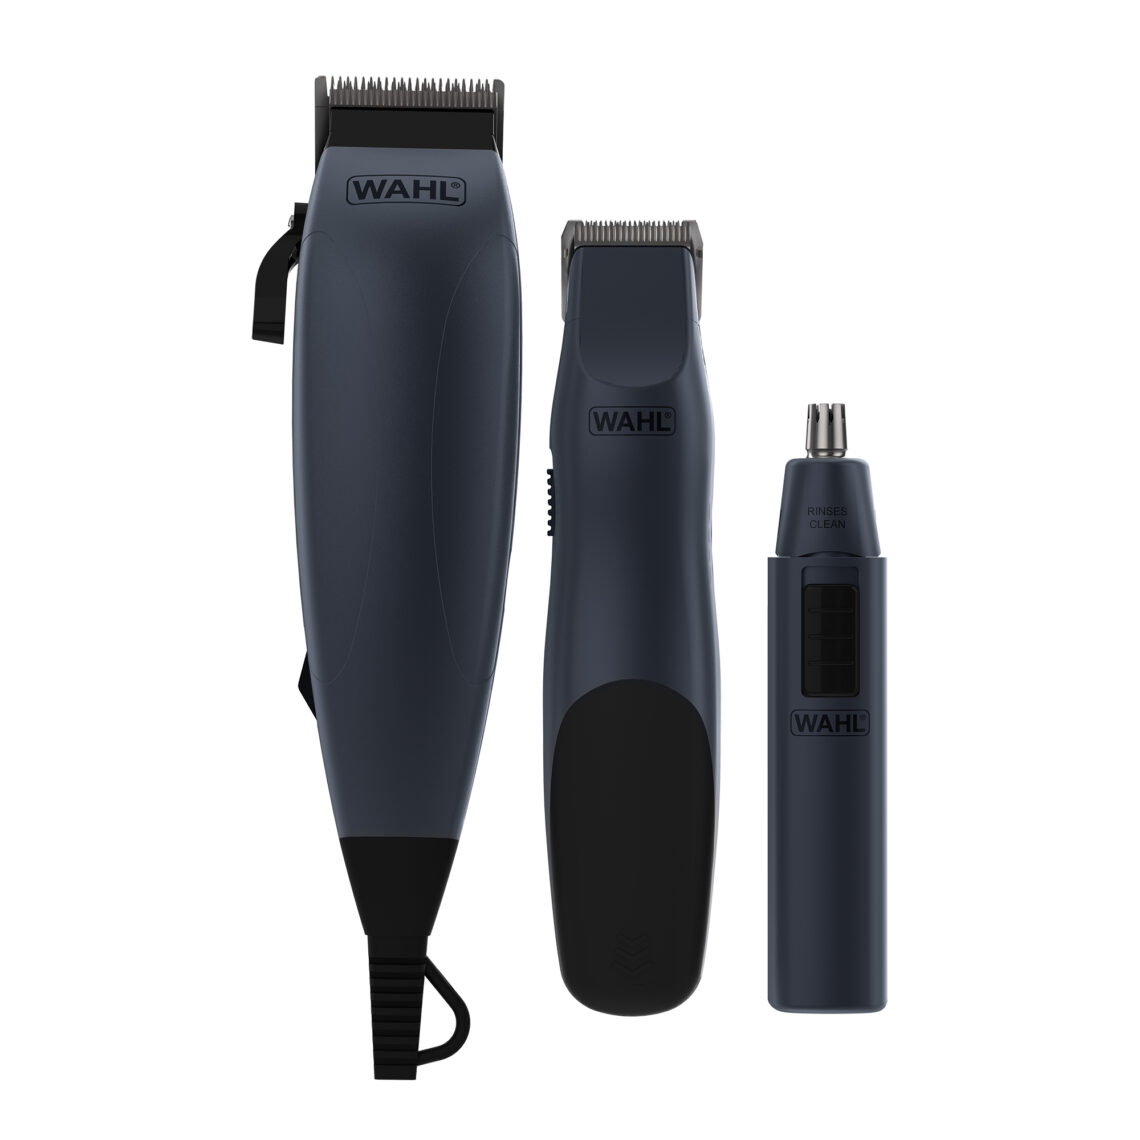 wahl uk clippers